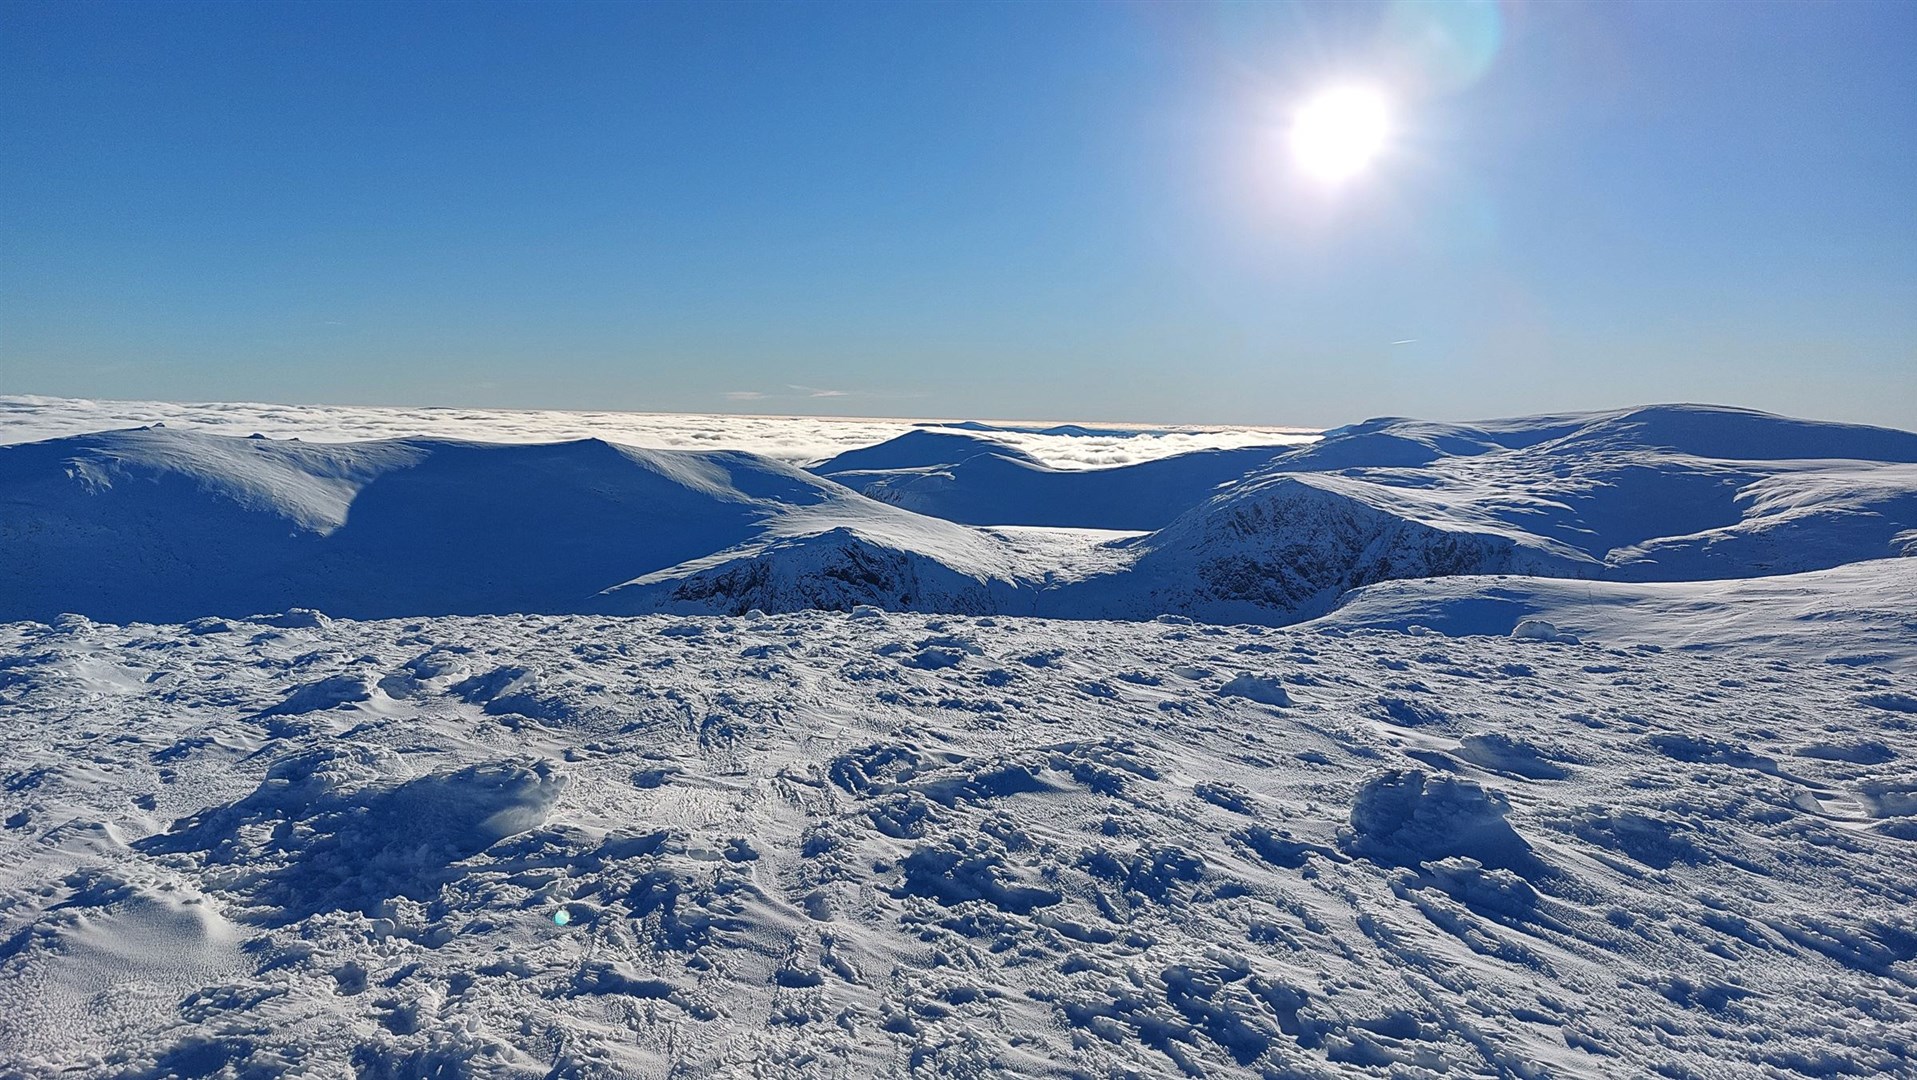 From Cairn Gorm summit looking south towards Loch Etchachan with Ben Macdui on the right and Beinn Mheadhoin on the left. The walker got lost in very different conditions.